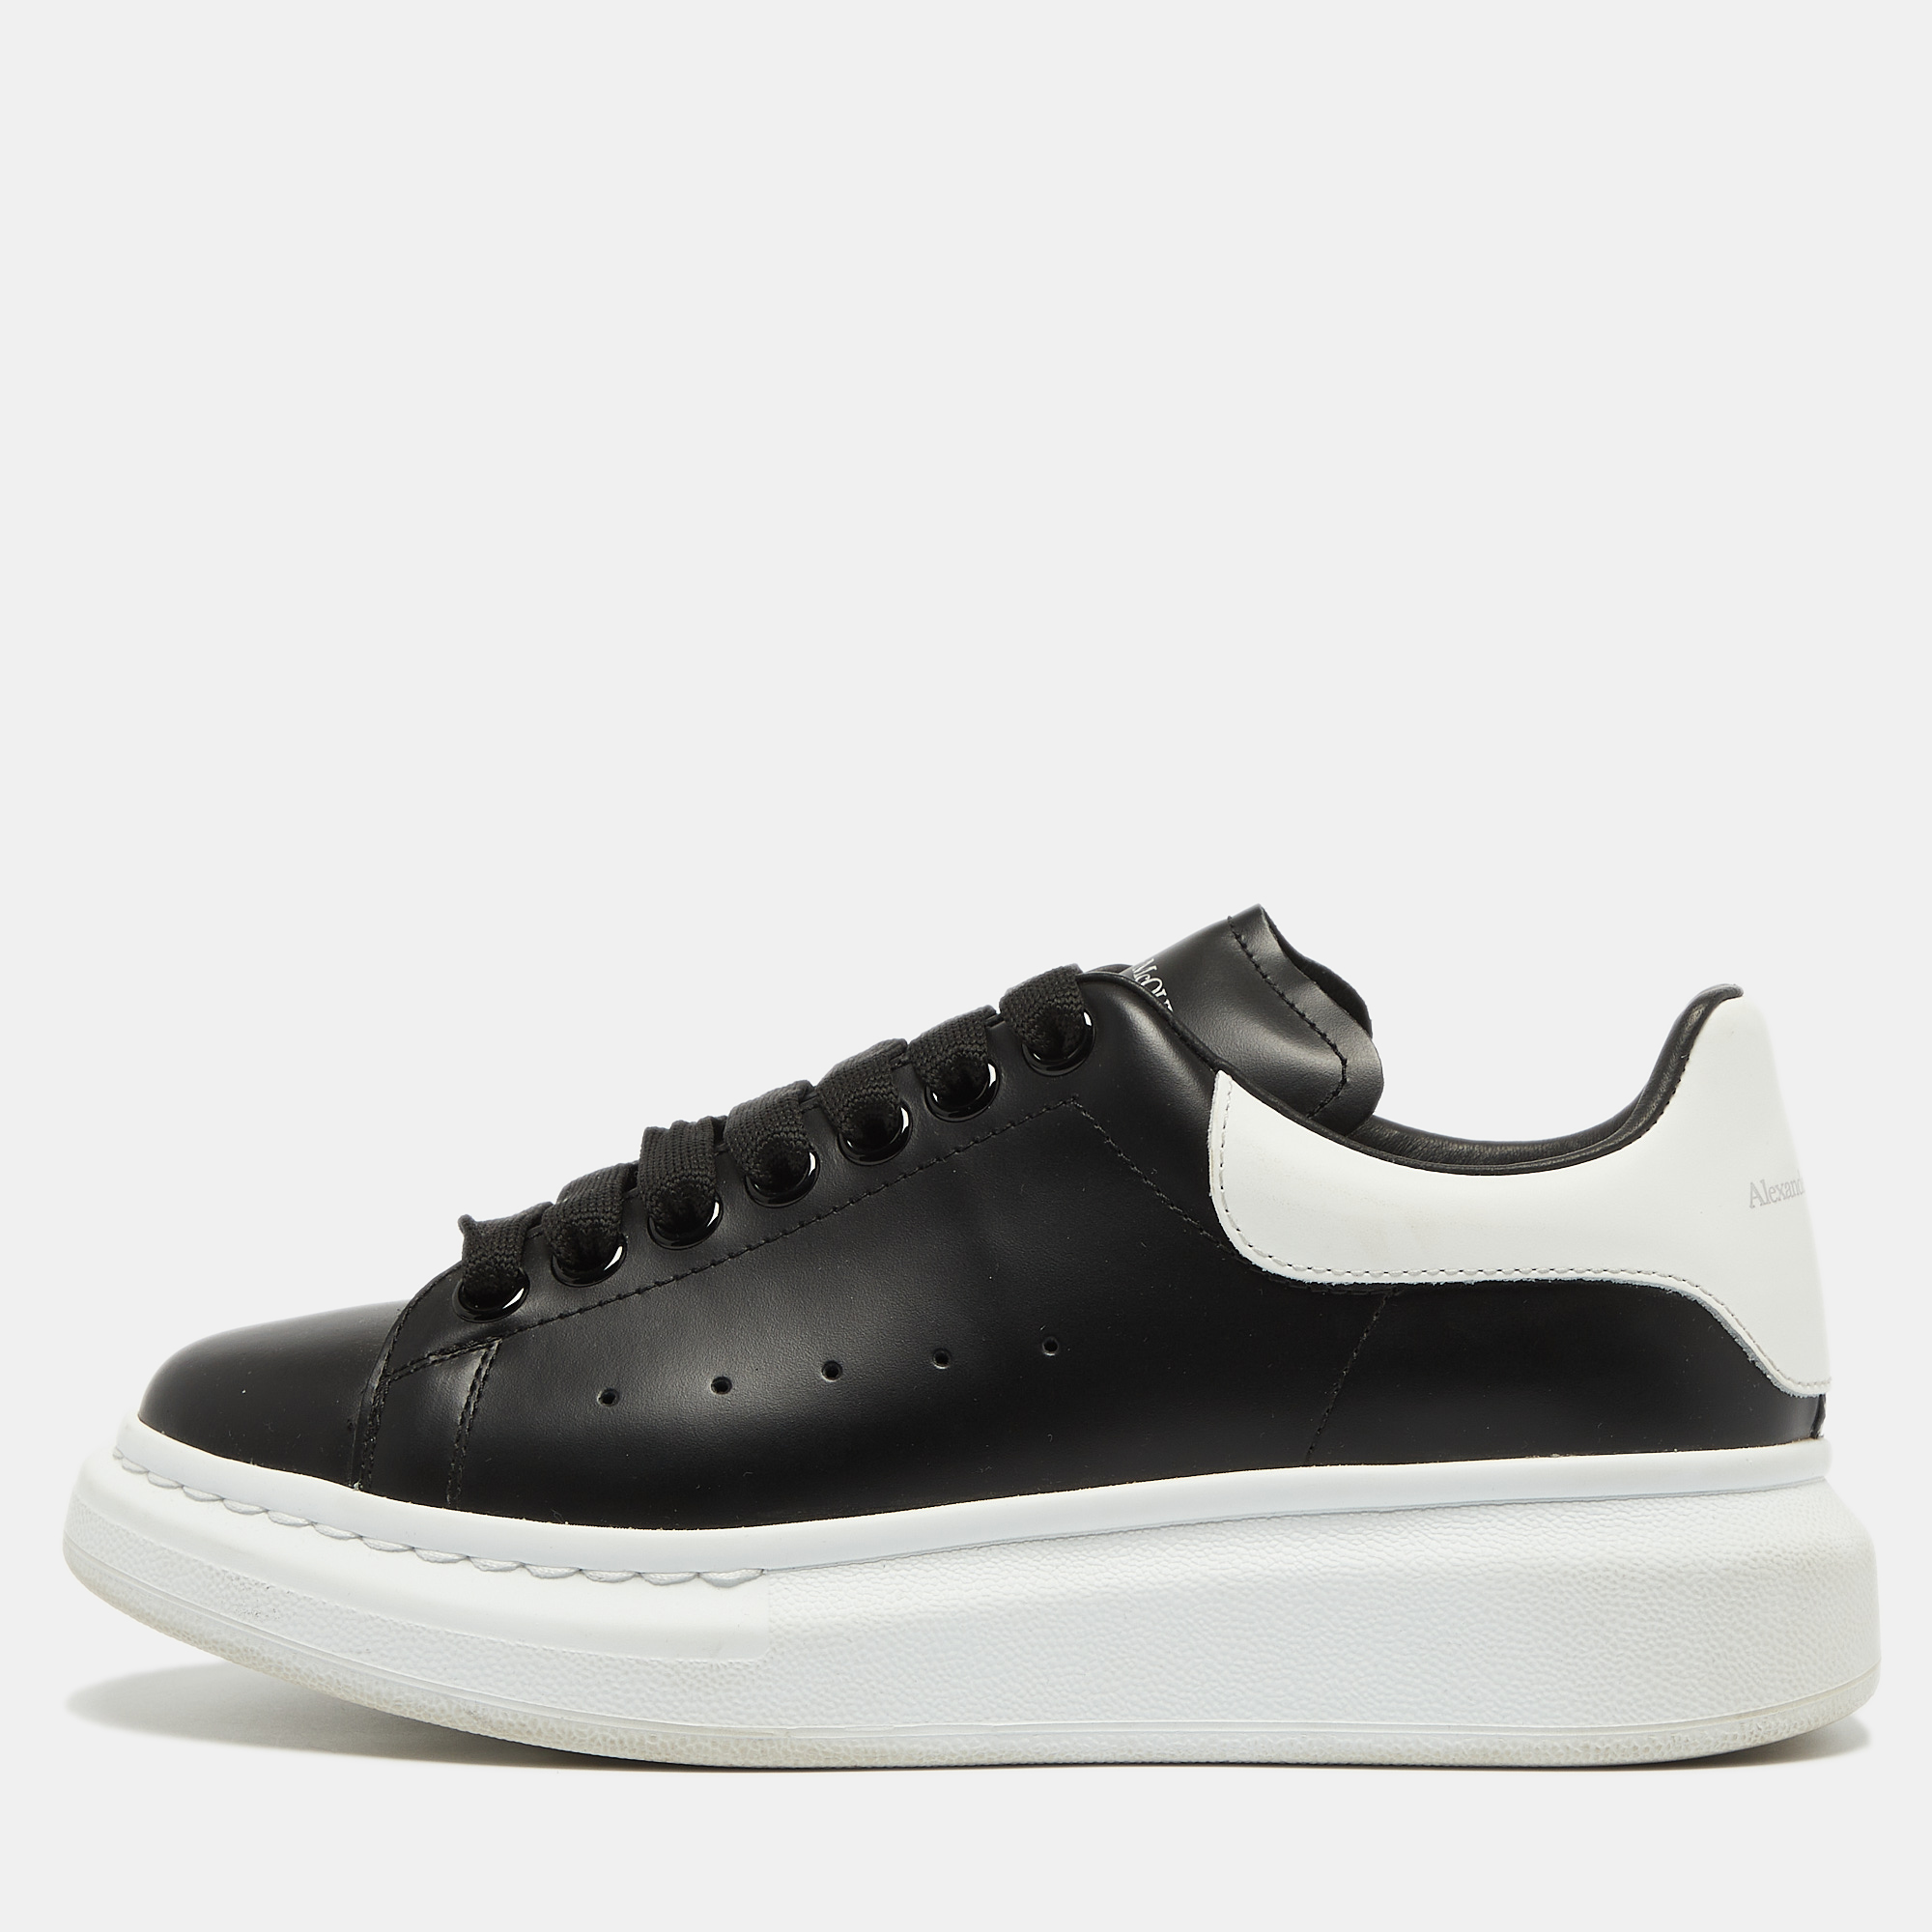 

Alexander McQueen Black/White Leather Oversized Sneakers Size